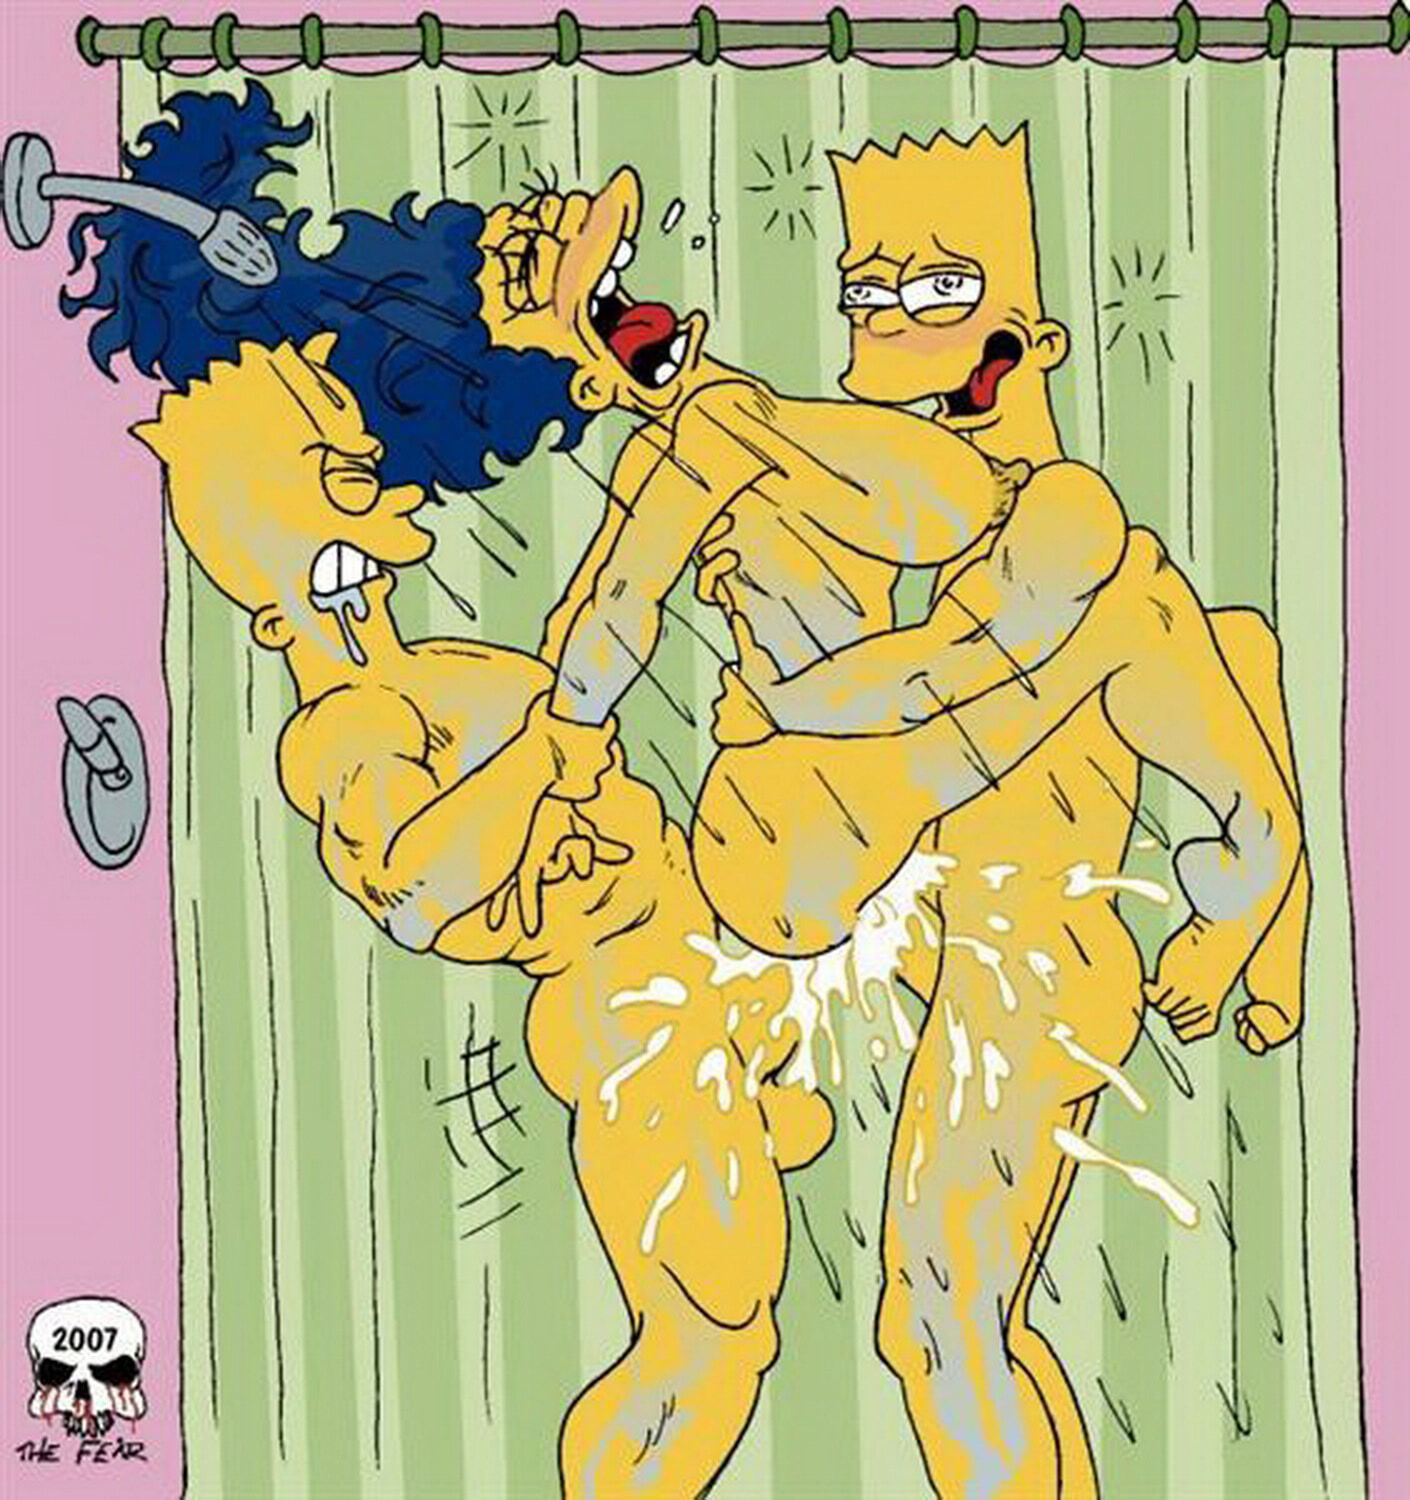 Sweet Bart Simpson and Hugo Simpson in Your Cartoon Porn gallery. 